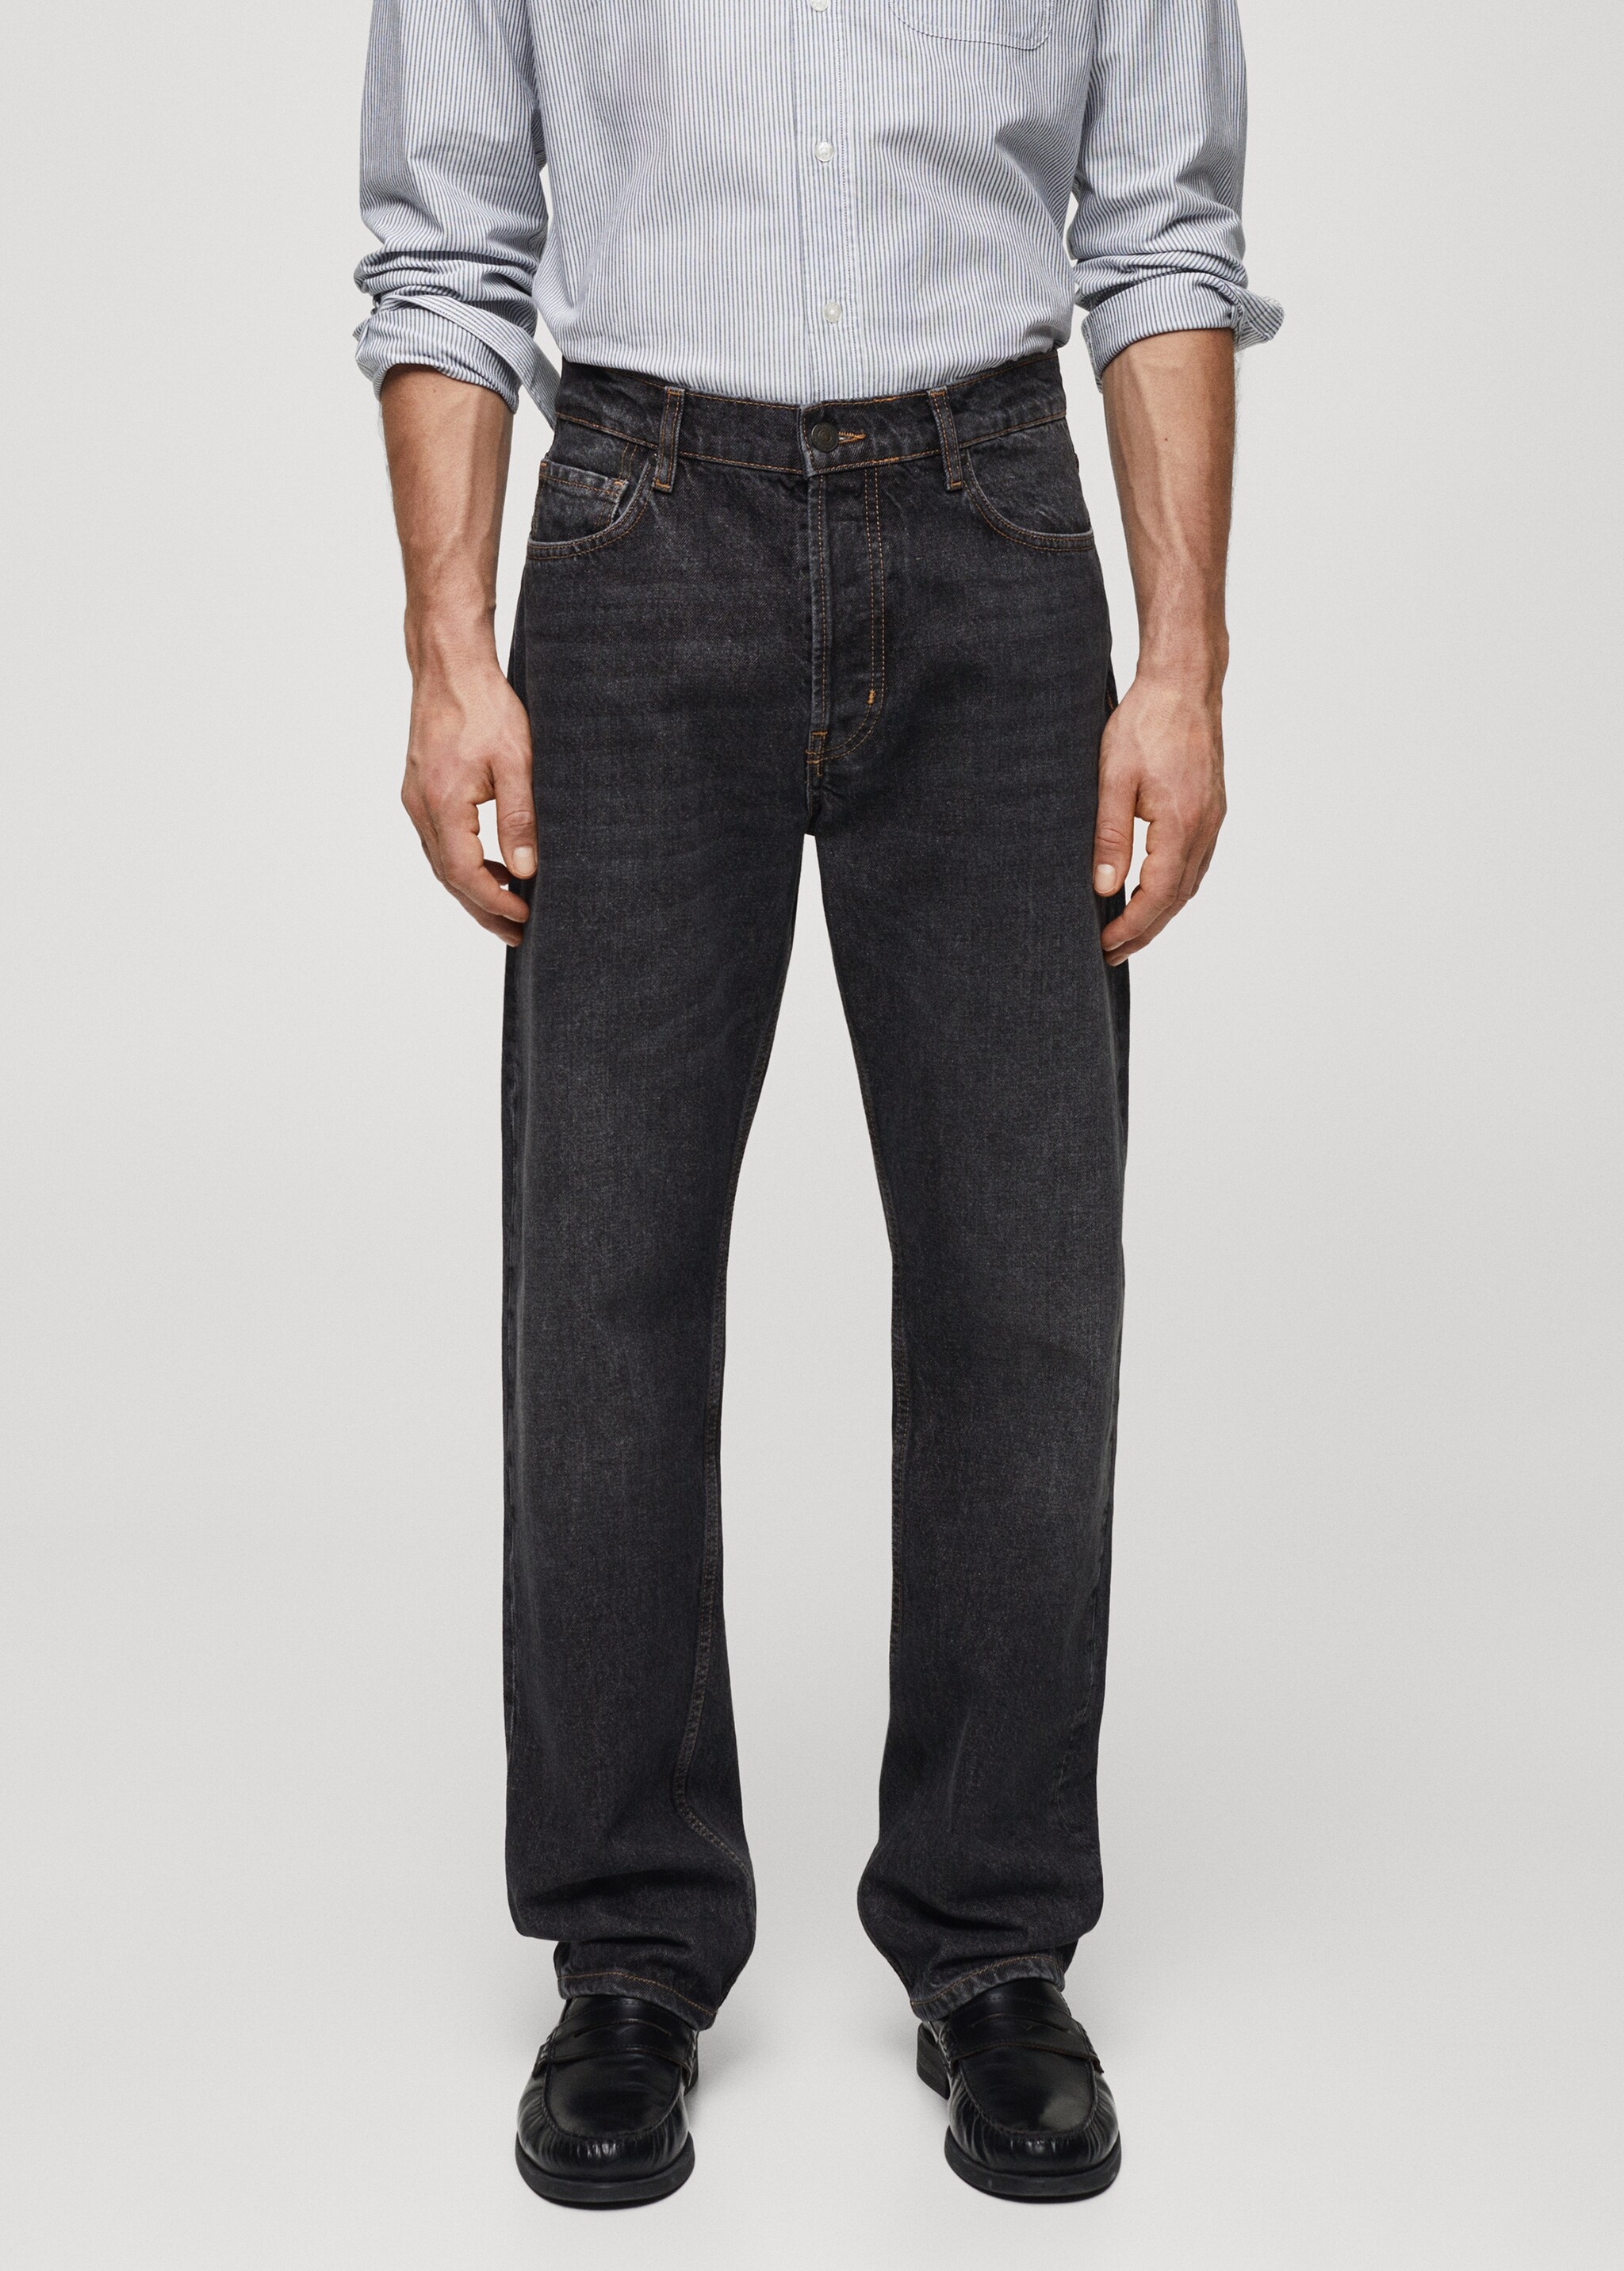 Relaxed-fit dark wash jeans - Medium plane